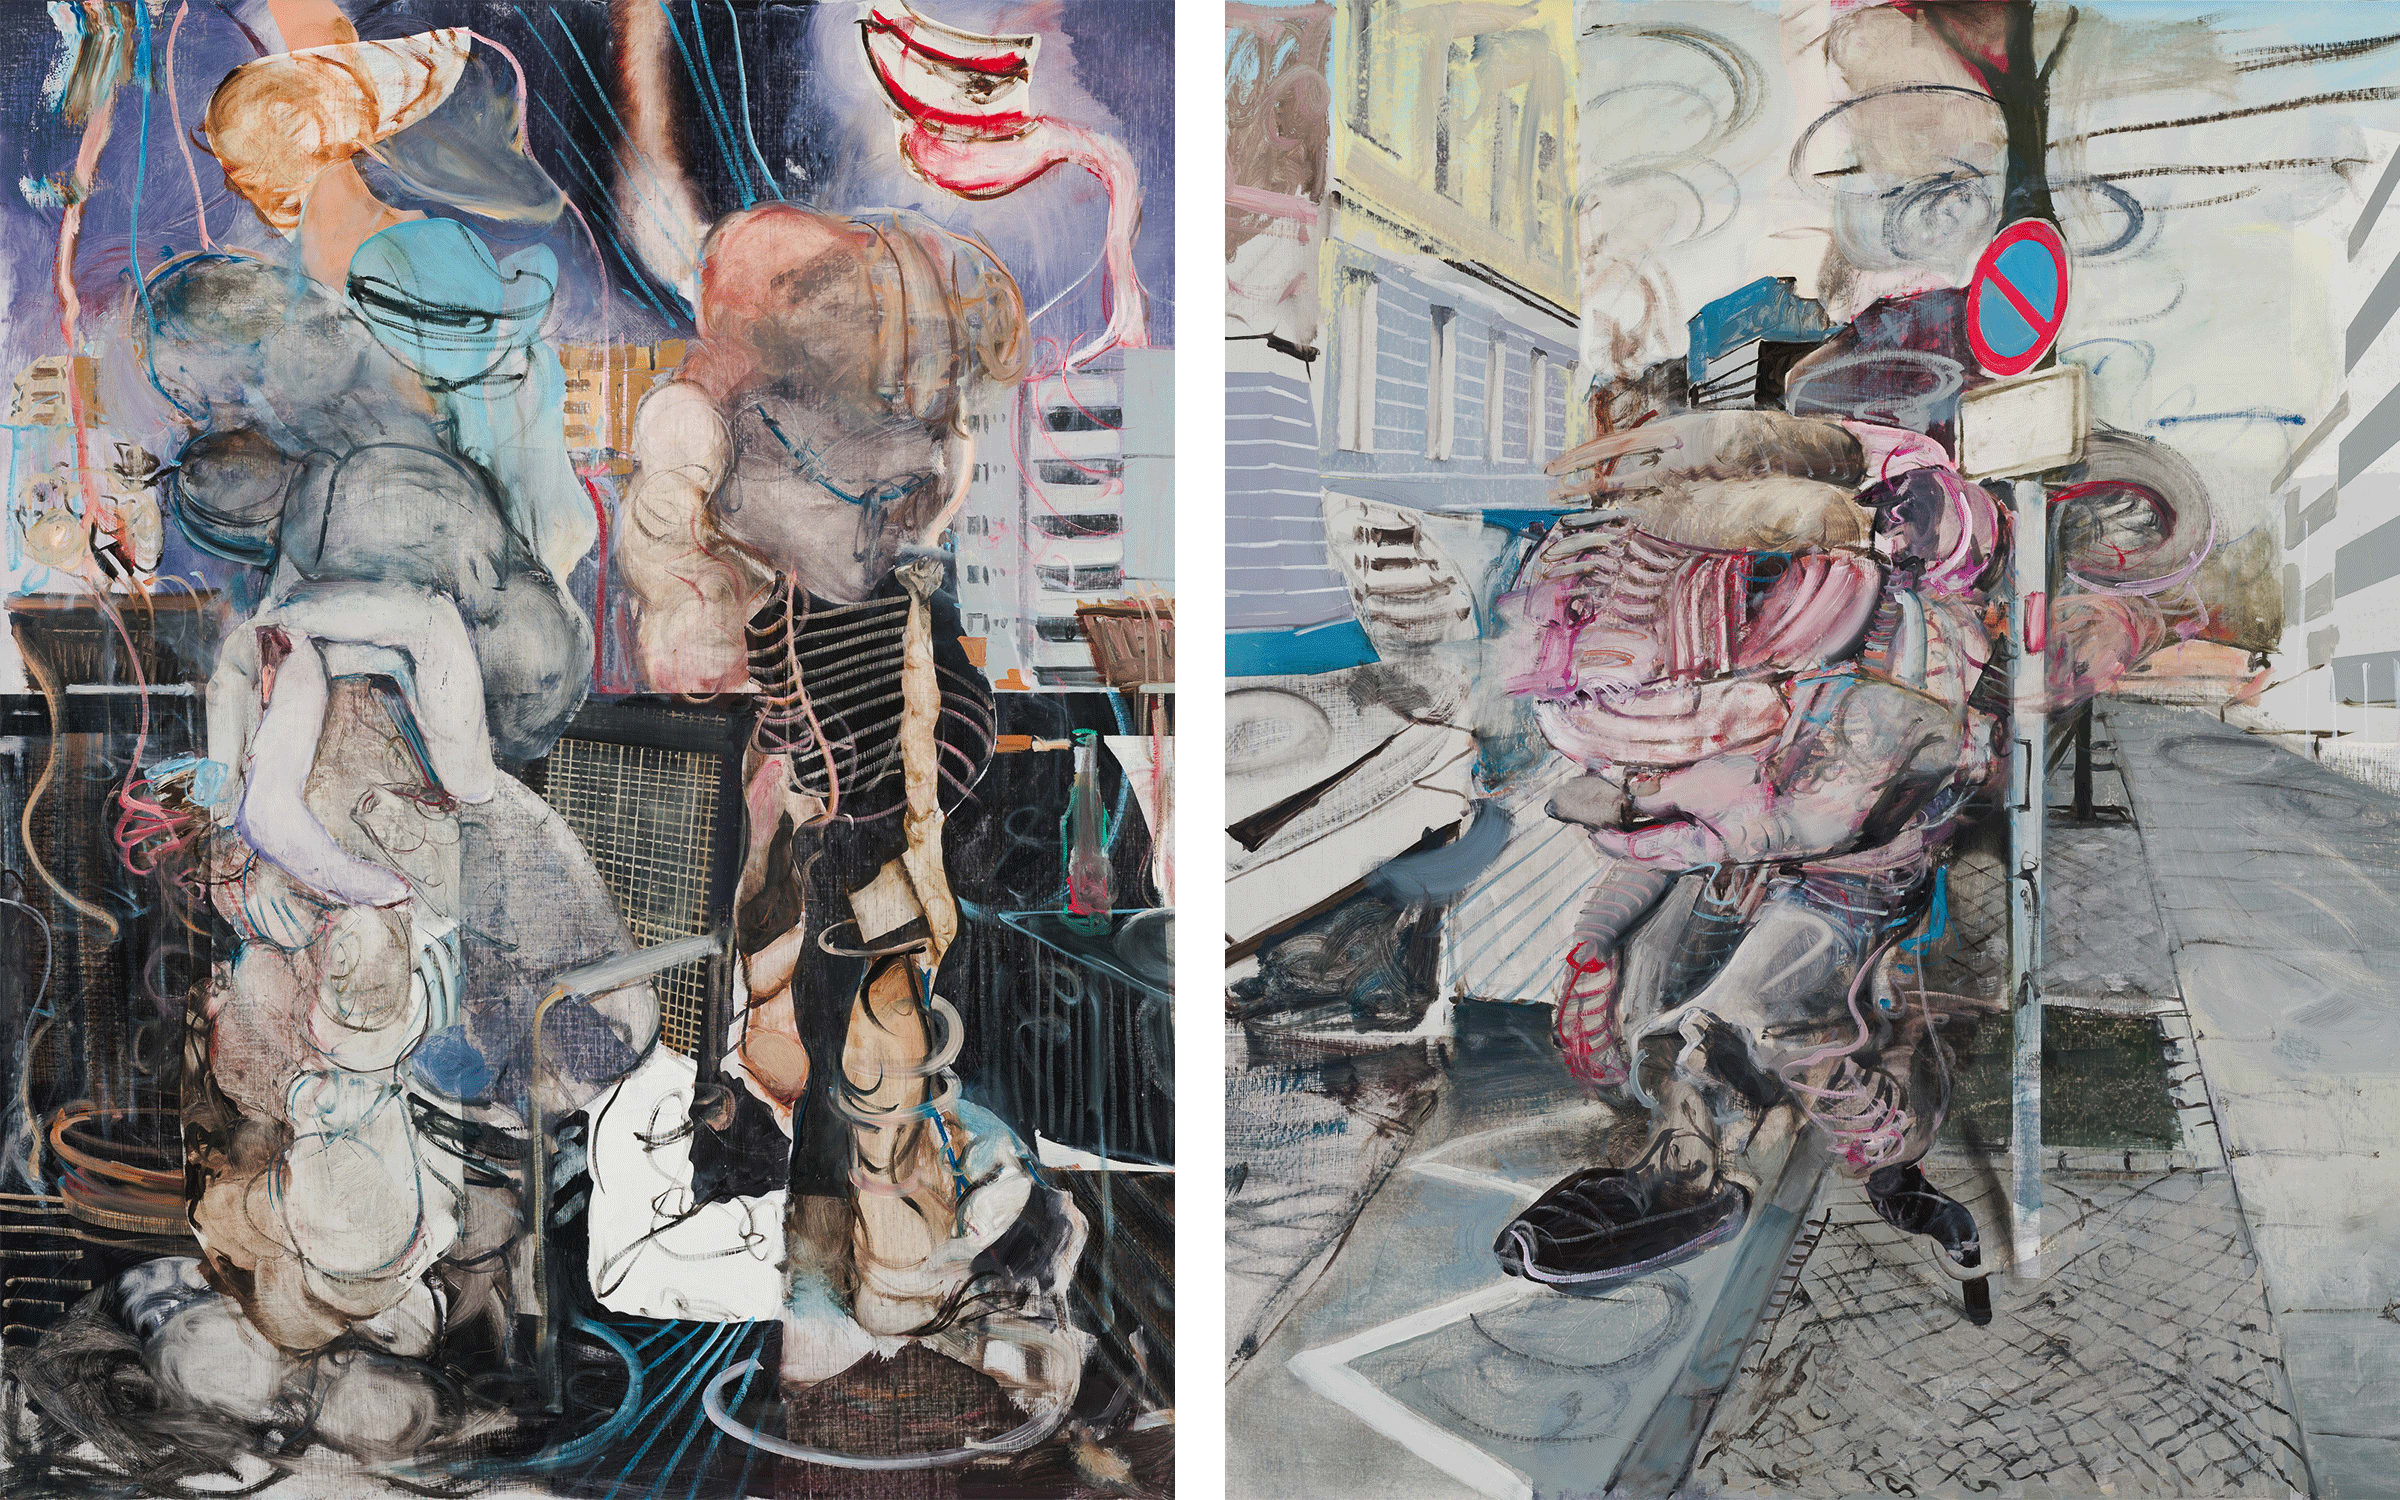 Artworks by Adrian Ghenie. Photograph by Trevor Good. Courtesy of the artist and Galeria Plan B Cluj, Berlin. Left: The Beginning, 2022. Right: Untitled, 2022.